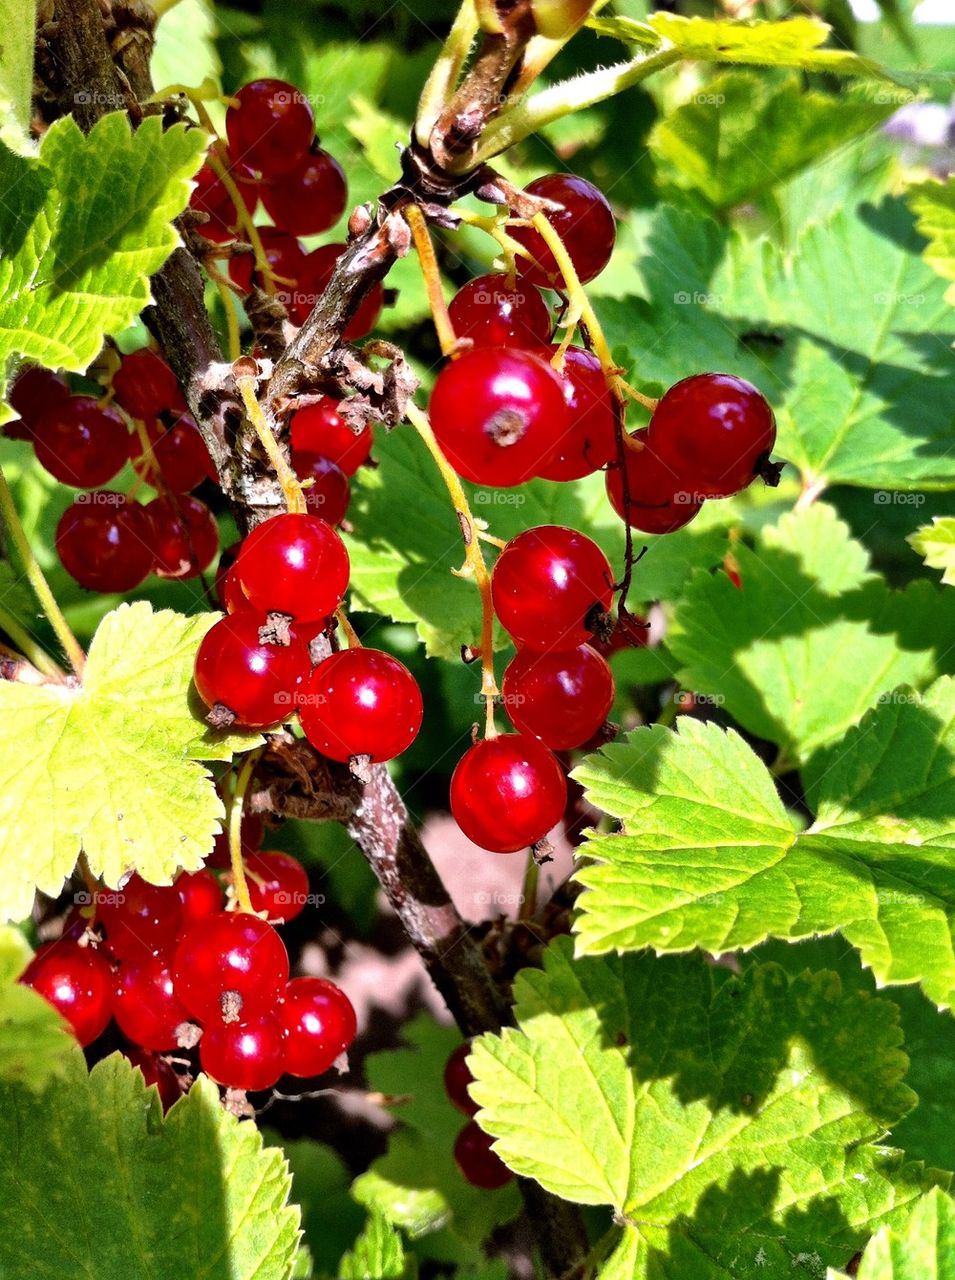 Currant bush with red ripen berries.